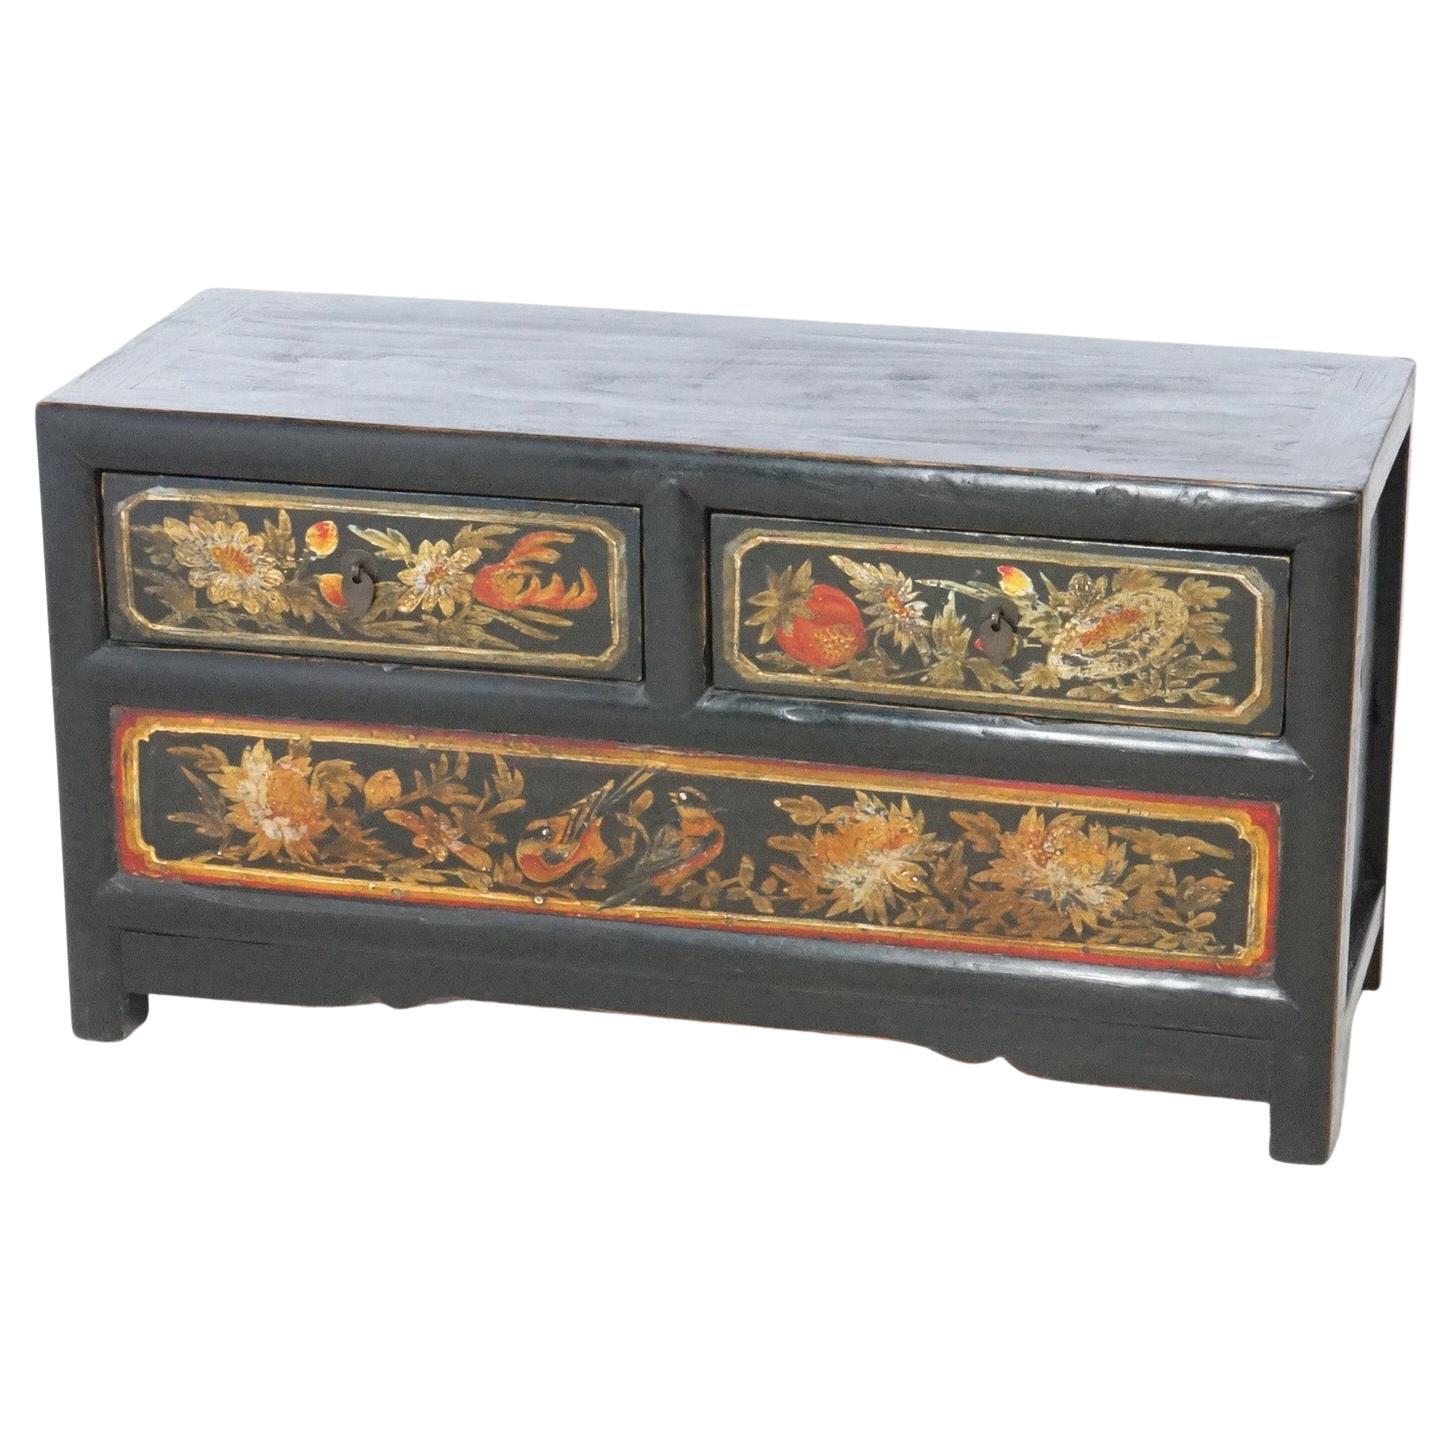 Chinese Polychrome Hand Painted Low Chest with Garden Birds & Fruit 20th C